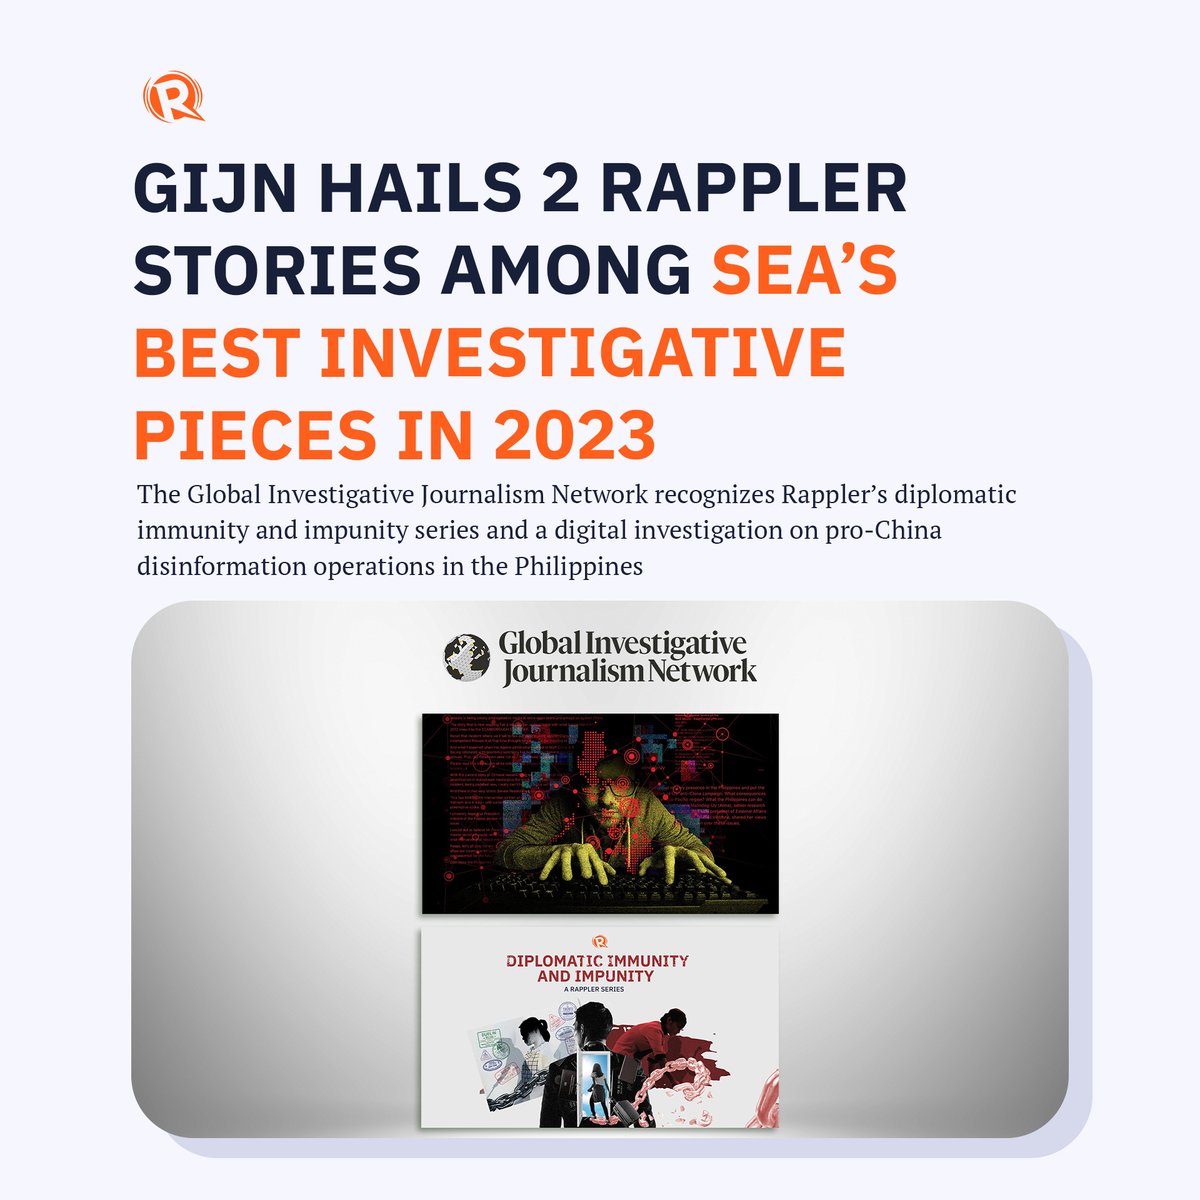 Two Rappler investigative stories were recognized among the Global Investigative Journalism Network’s Best Investigative Stories from Southeast Asia in 2023. #CourageON #TeamRappler 

More details here: trib.al/zOriizG